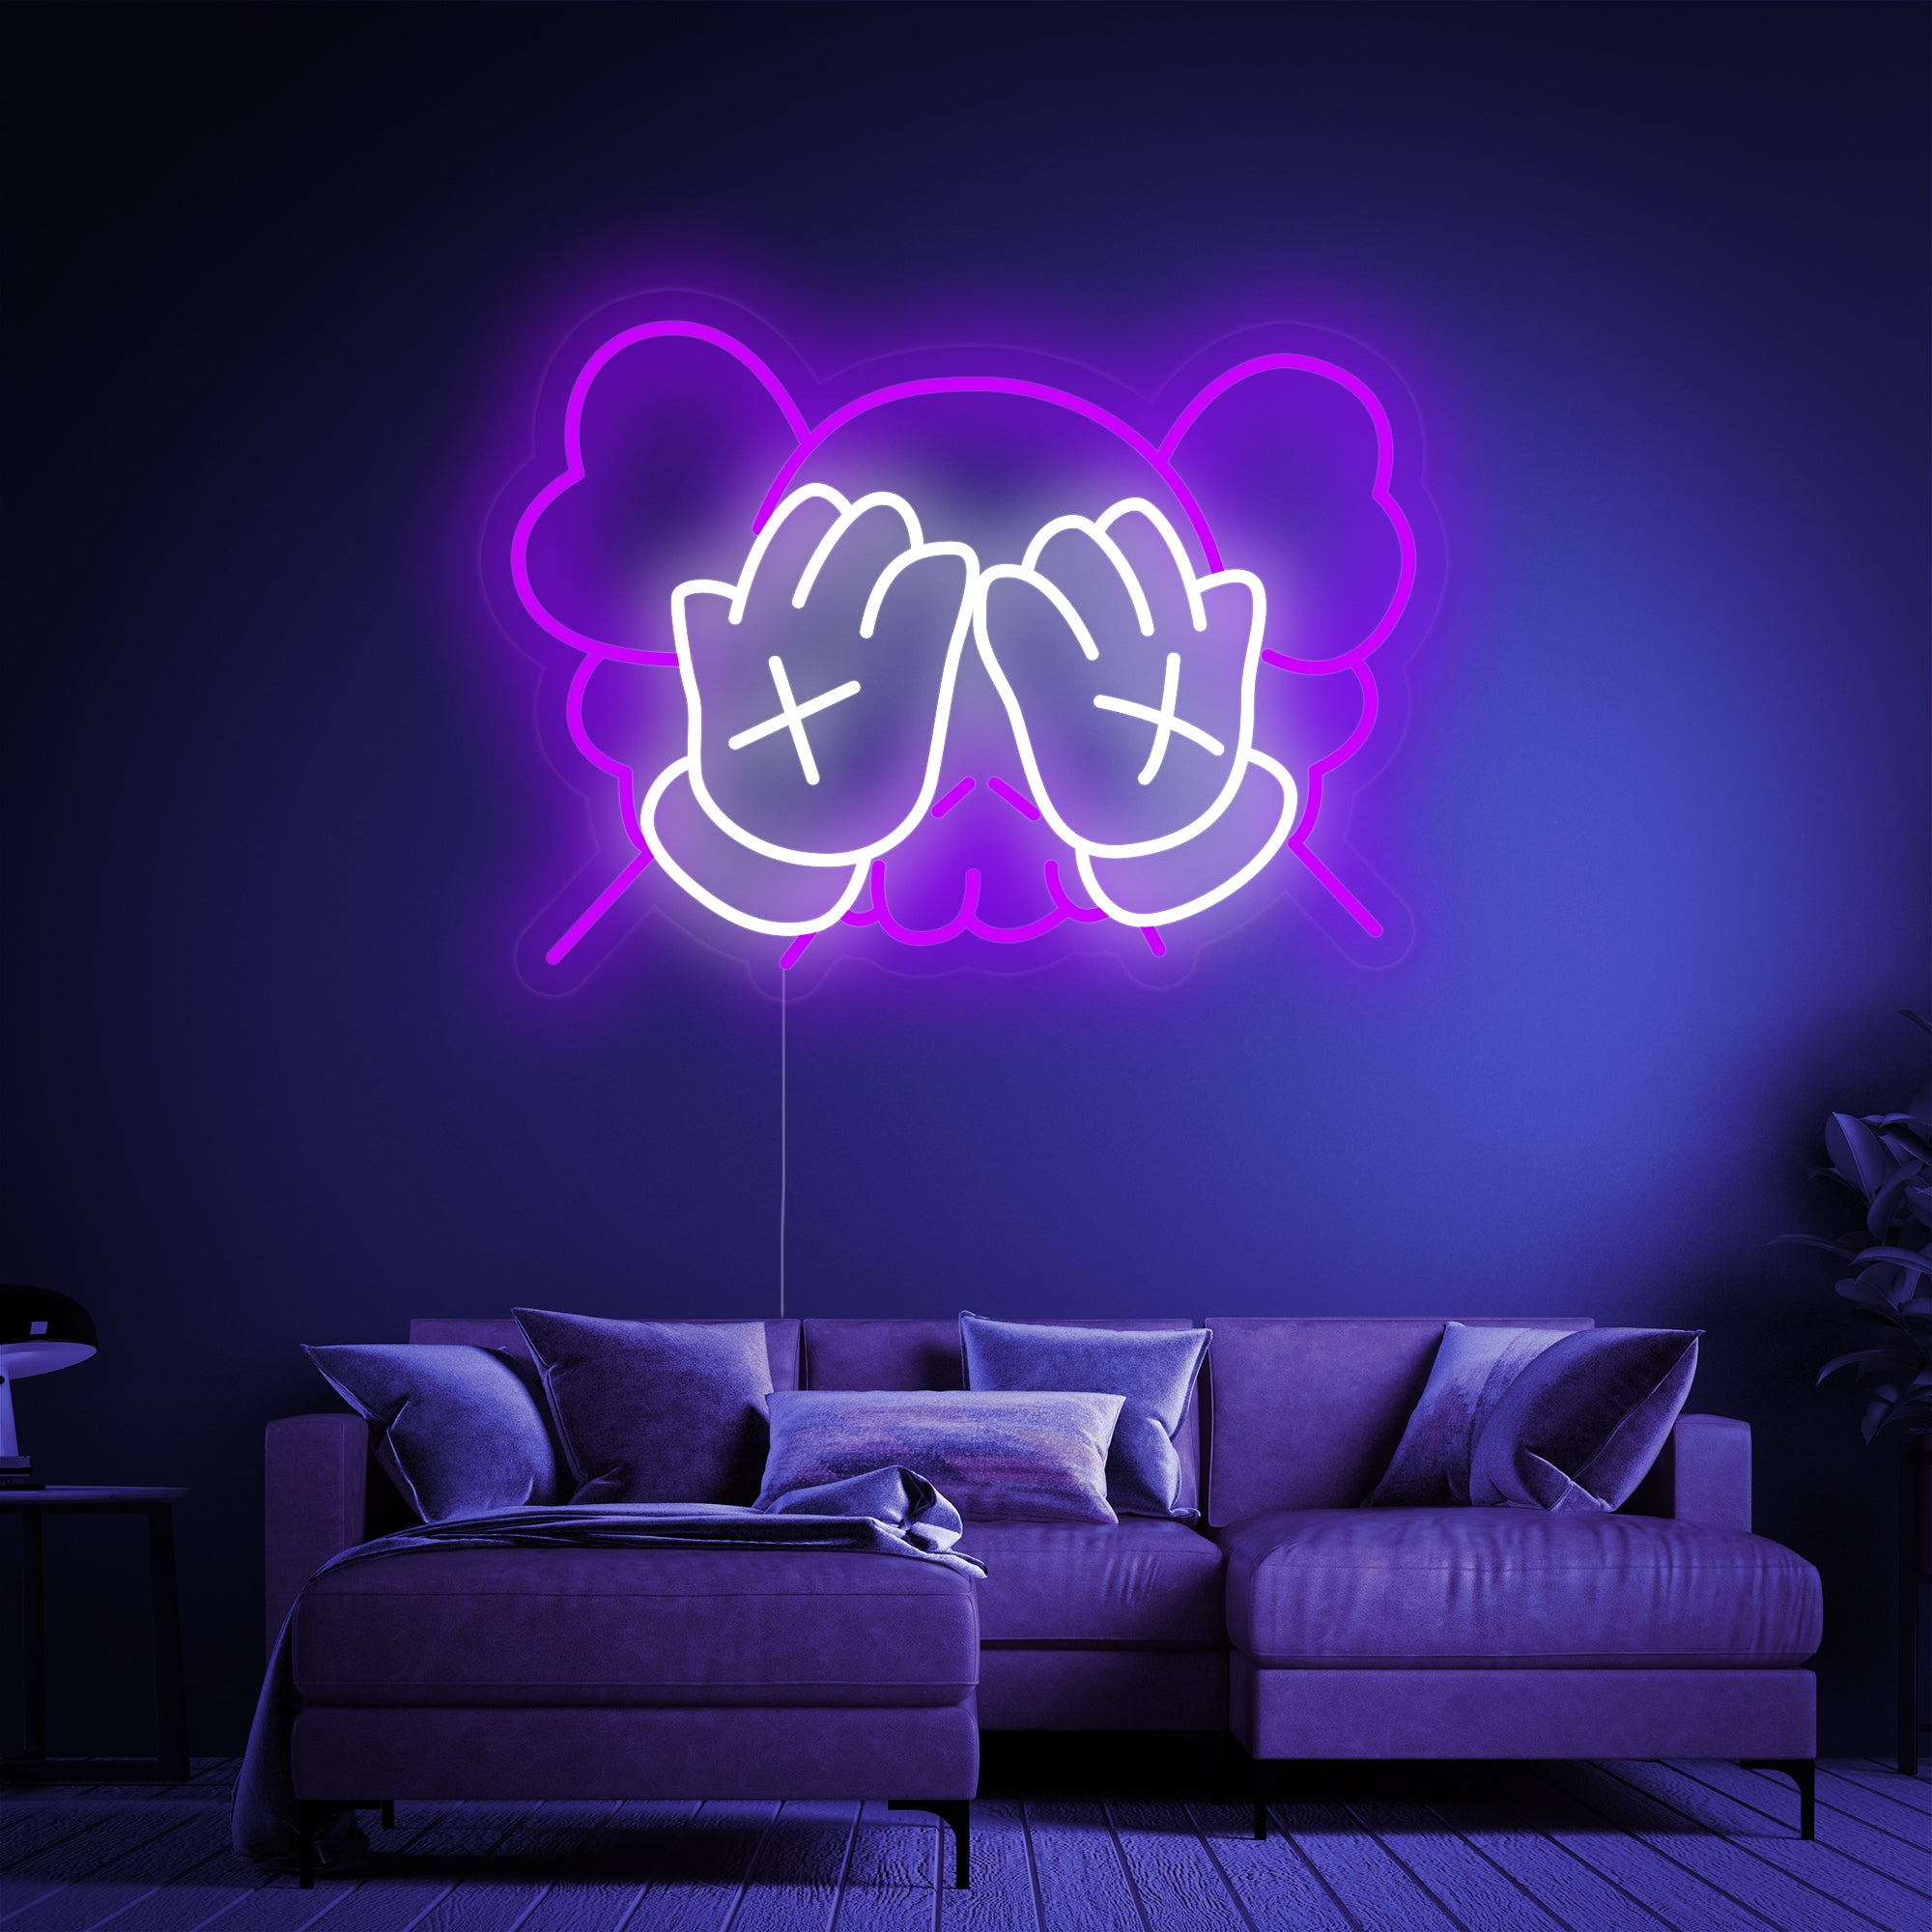 Anime neon sign - Glowing Neon Sign on brickwall wall - 3D rendered royalty  free stock illustration Stock Photo - Alamy